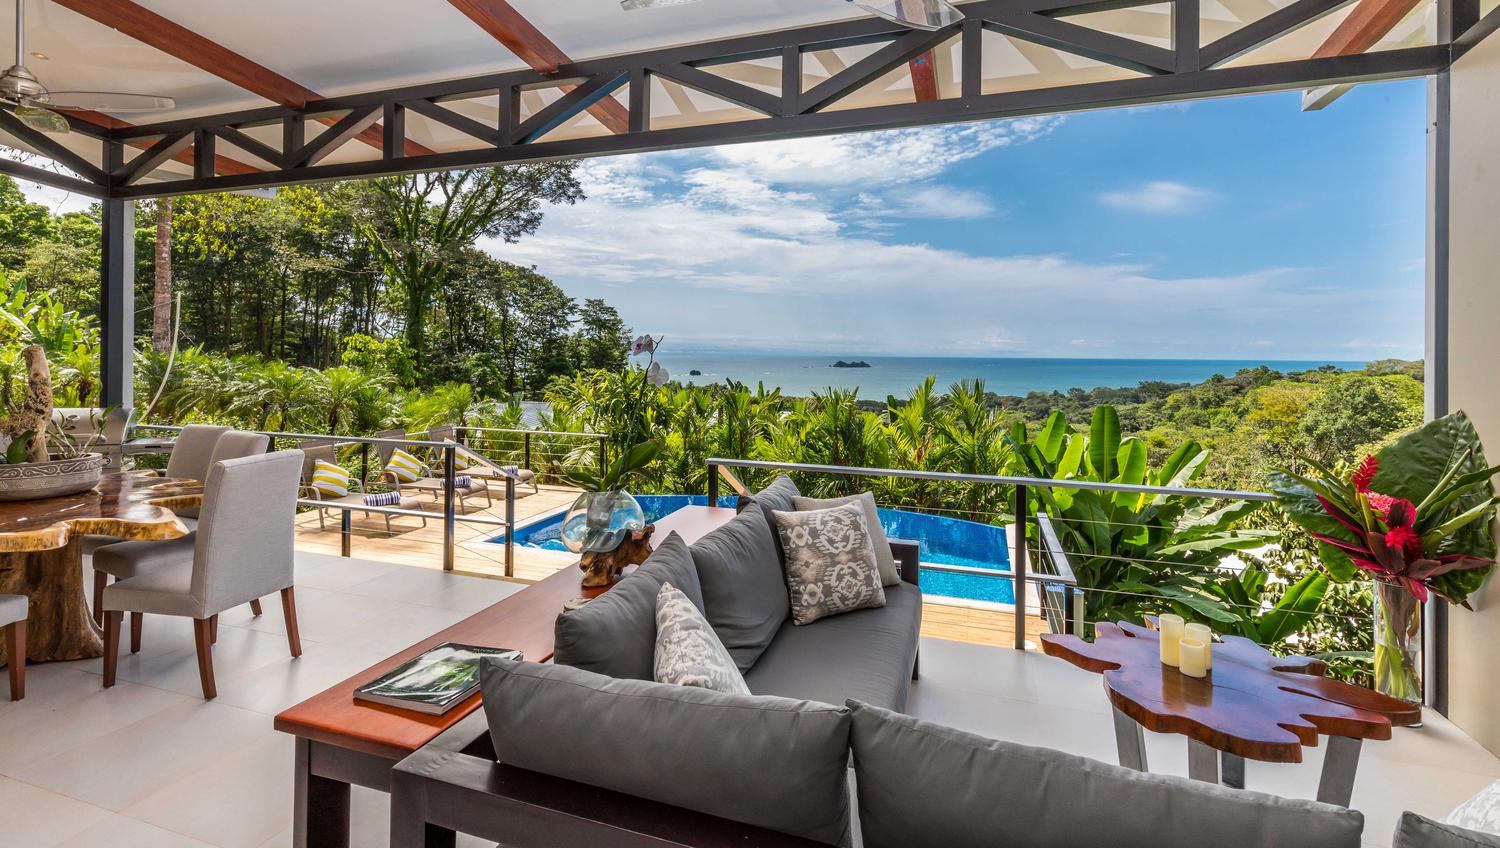 Outdoor Living with Infinity Pool & Spectacular Views!